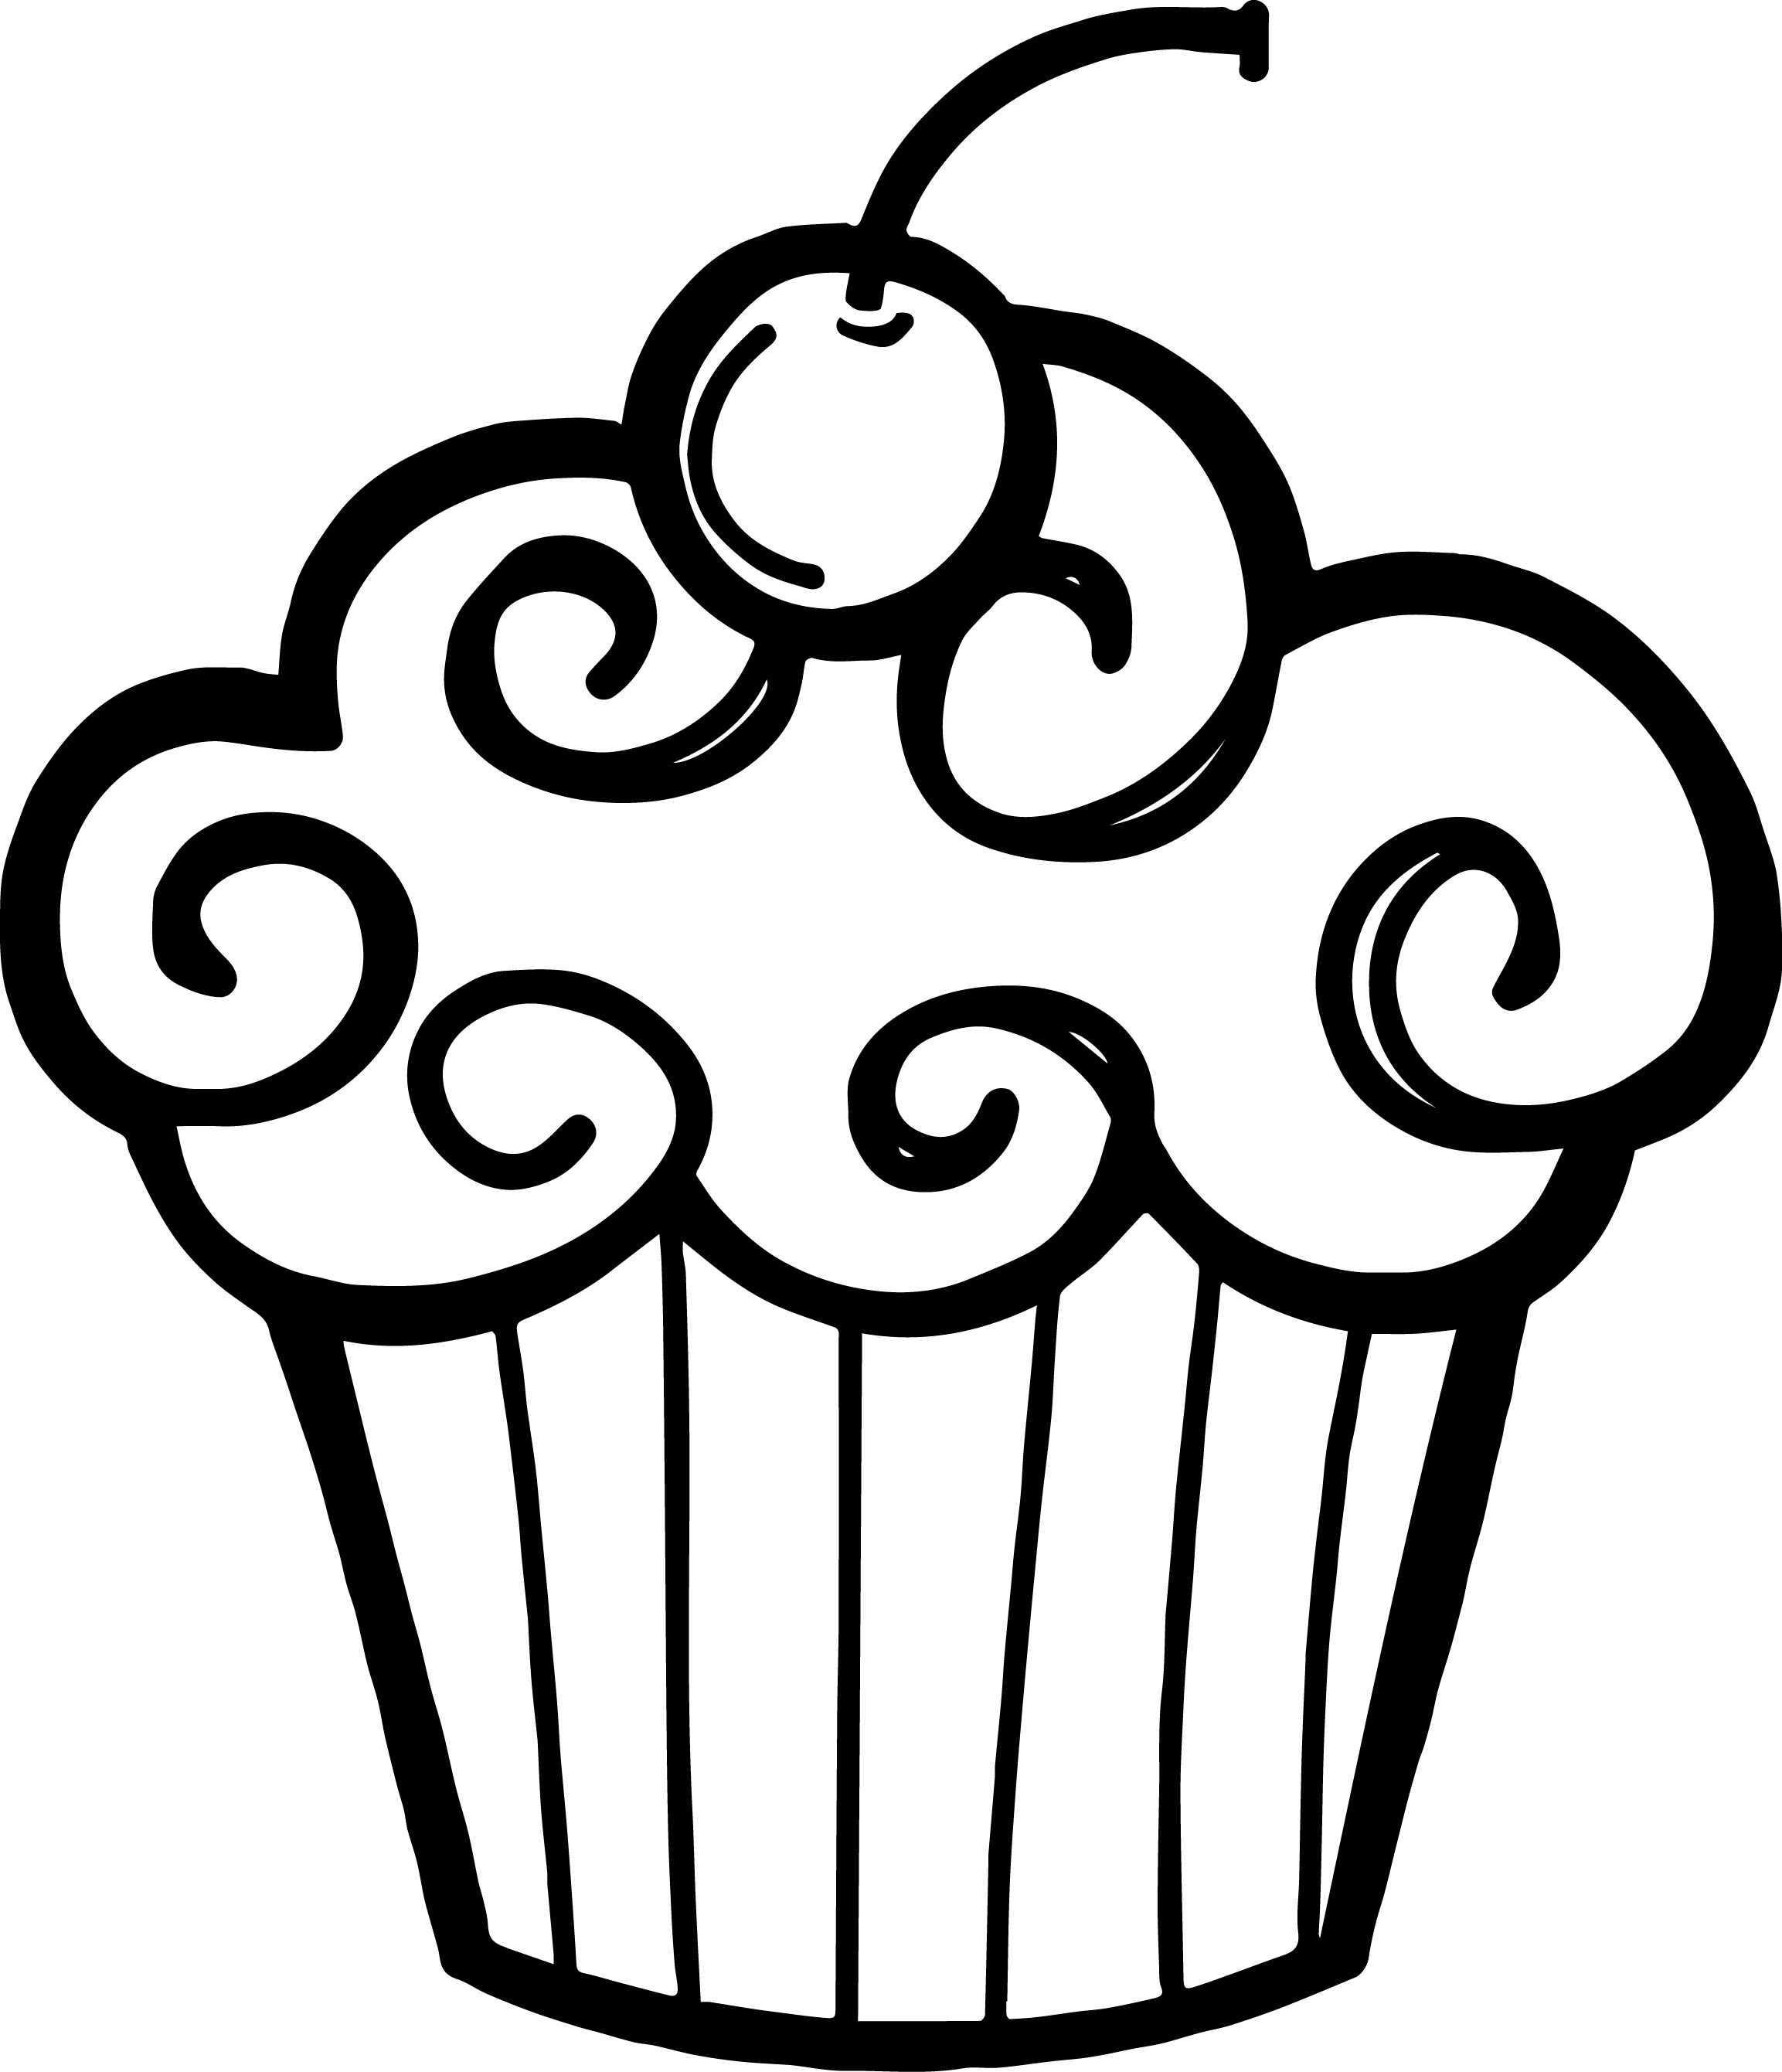 Cupcake Clipart Outline - ClipArt Best